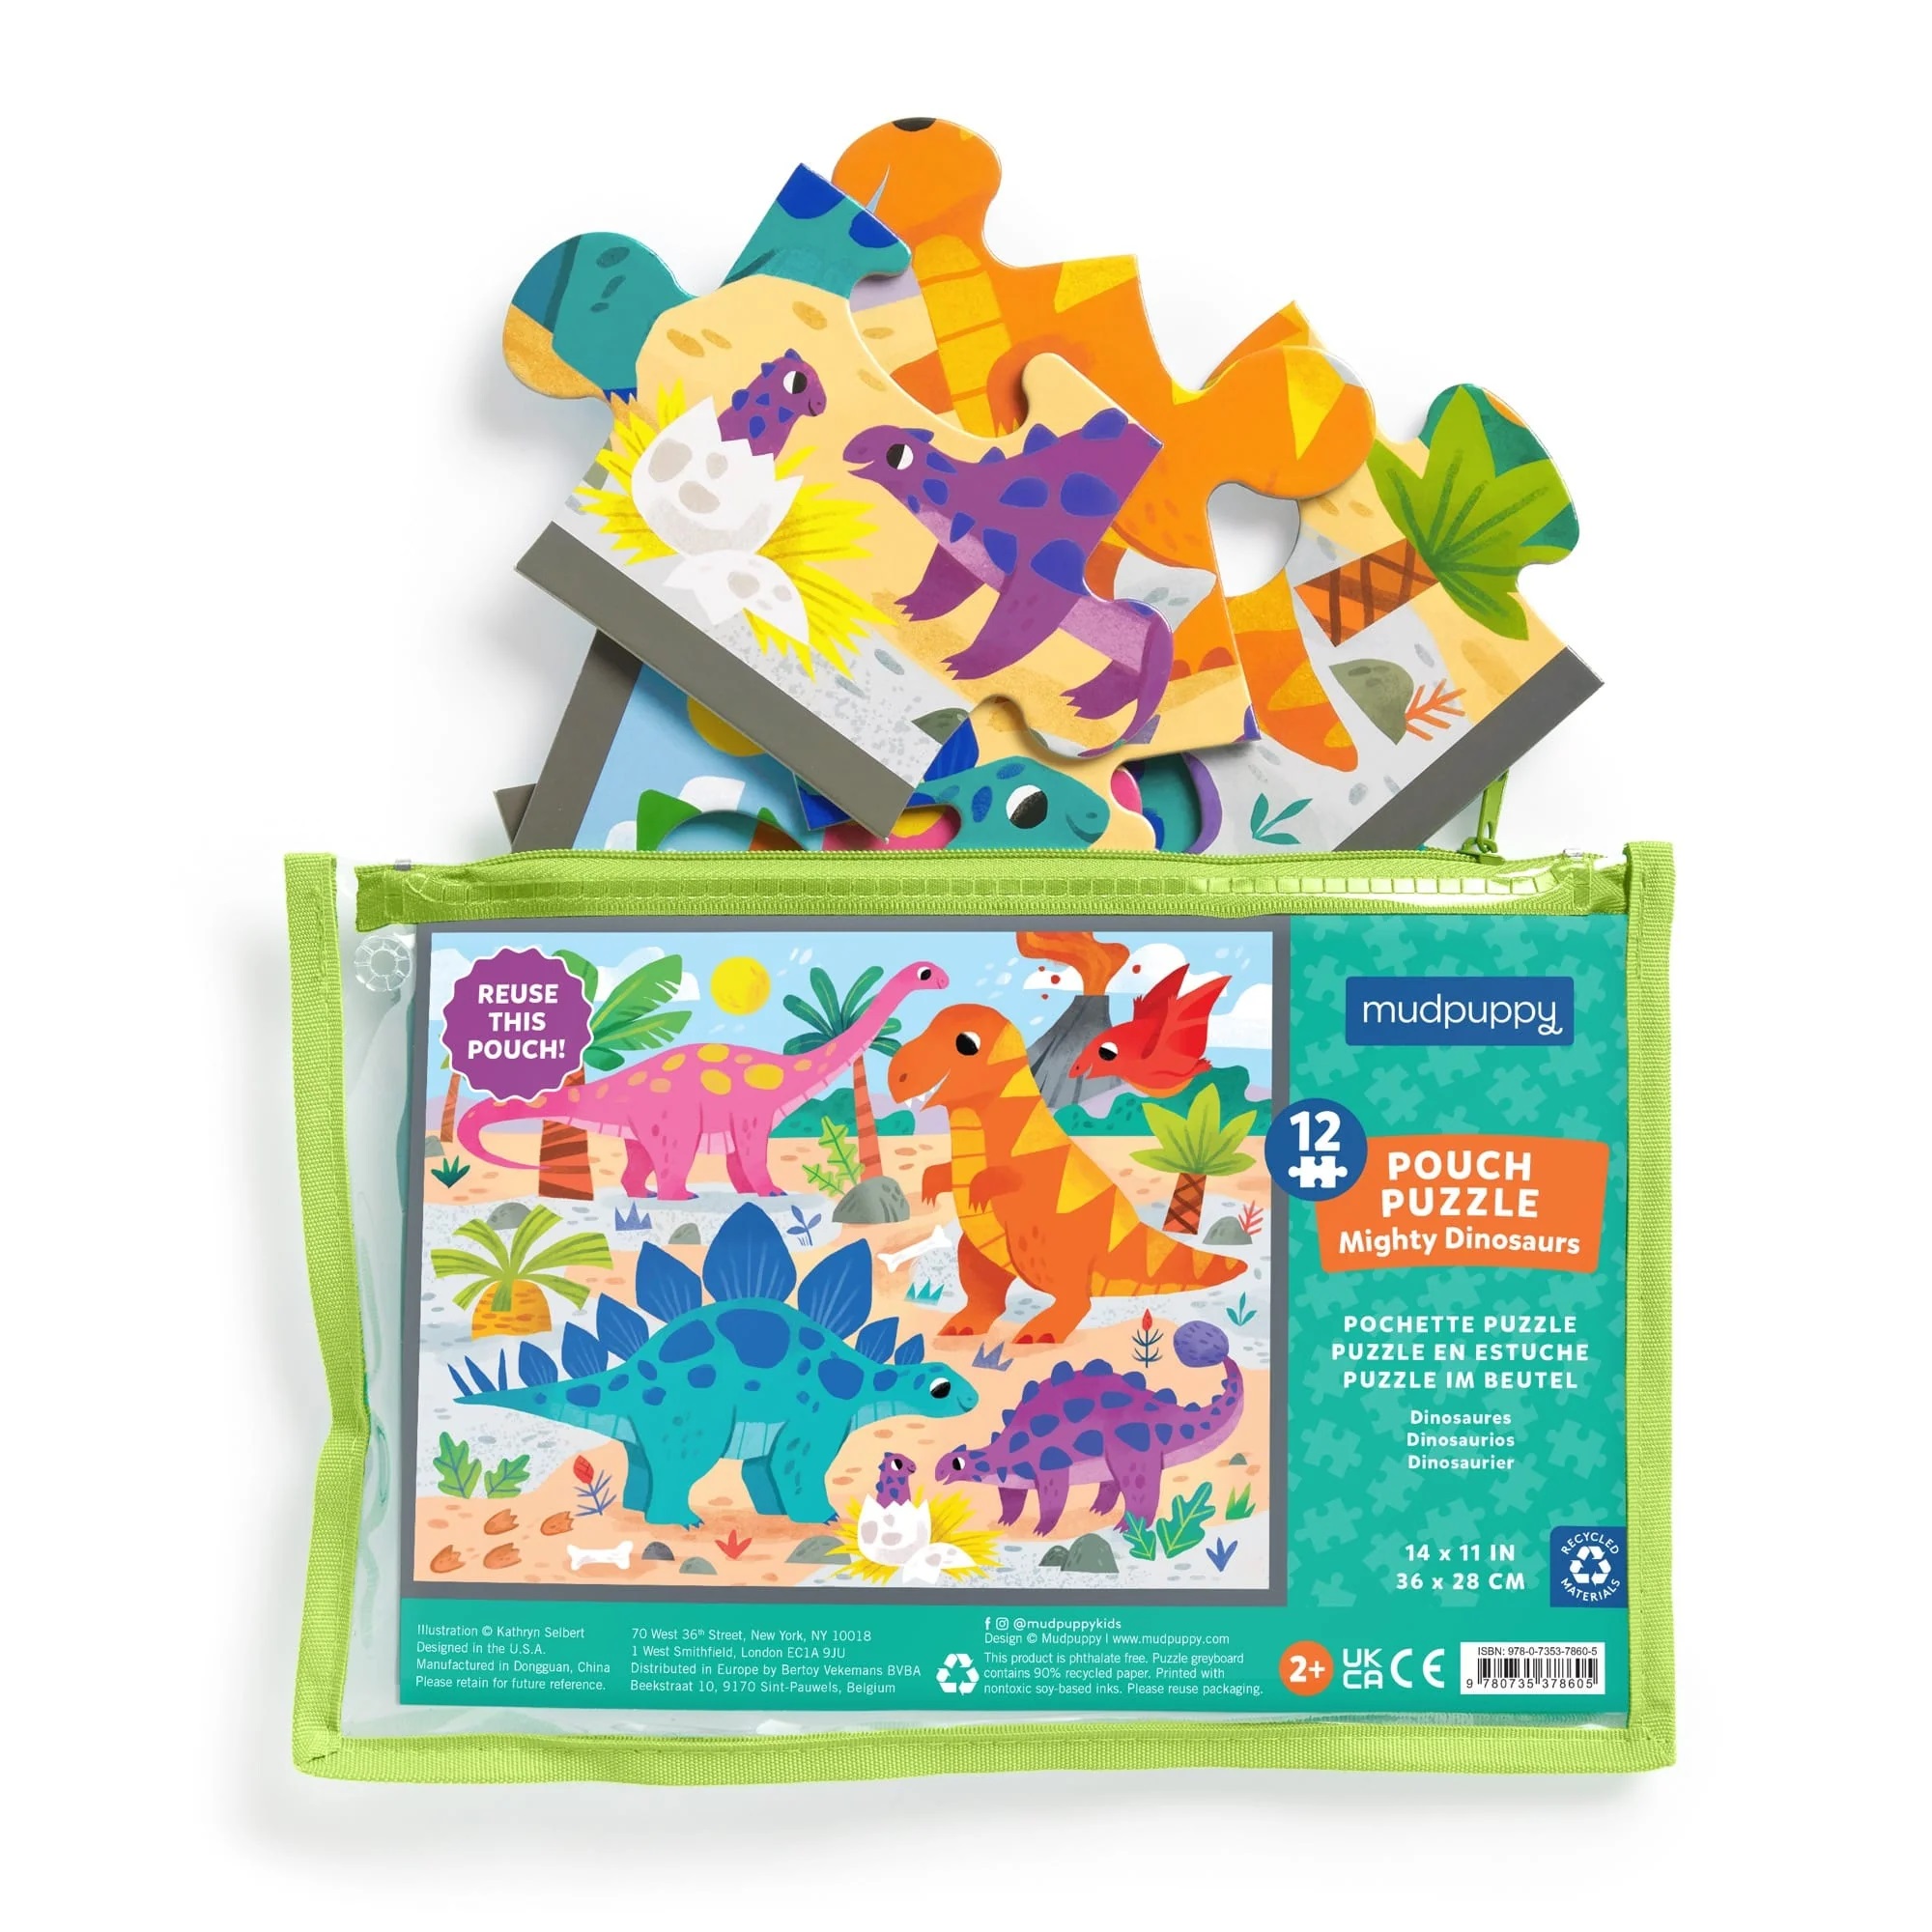 Mighty Dinosaurs 12 Piece Pouch Puzzle 2